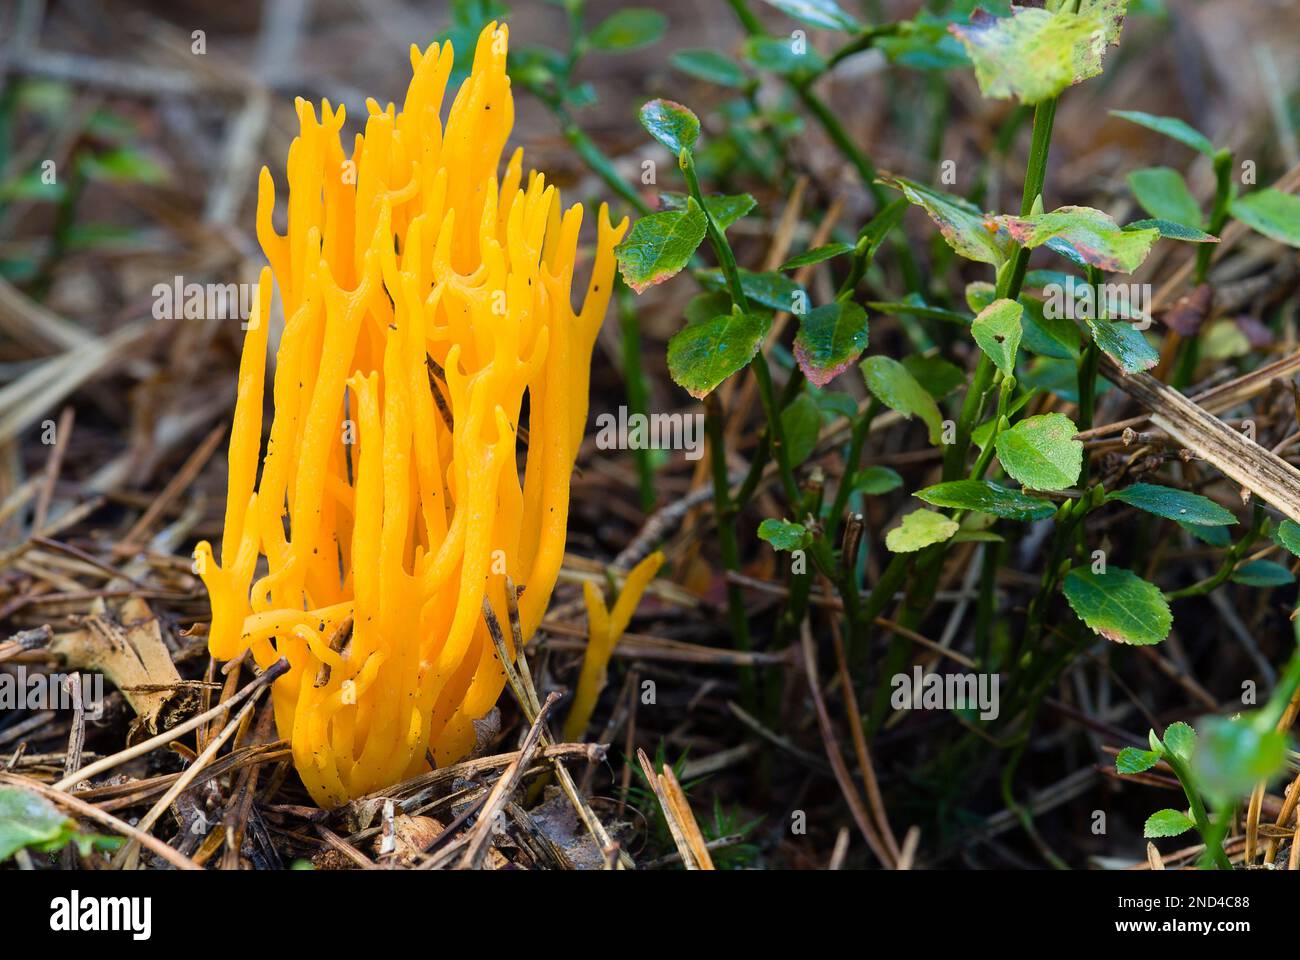 Bright yellow Staghorn fungus, also known as Jelly Fungus, growing near fallen confers in the New Forest, Hampshire, UK. Stock Photo